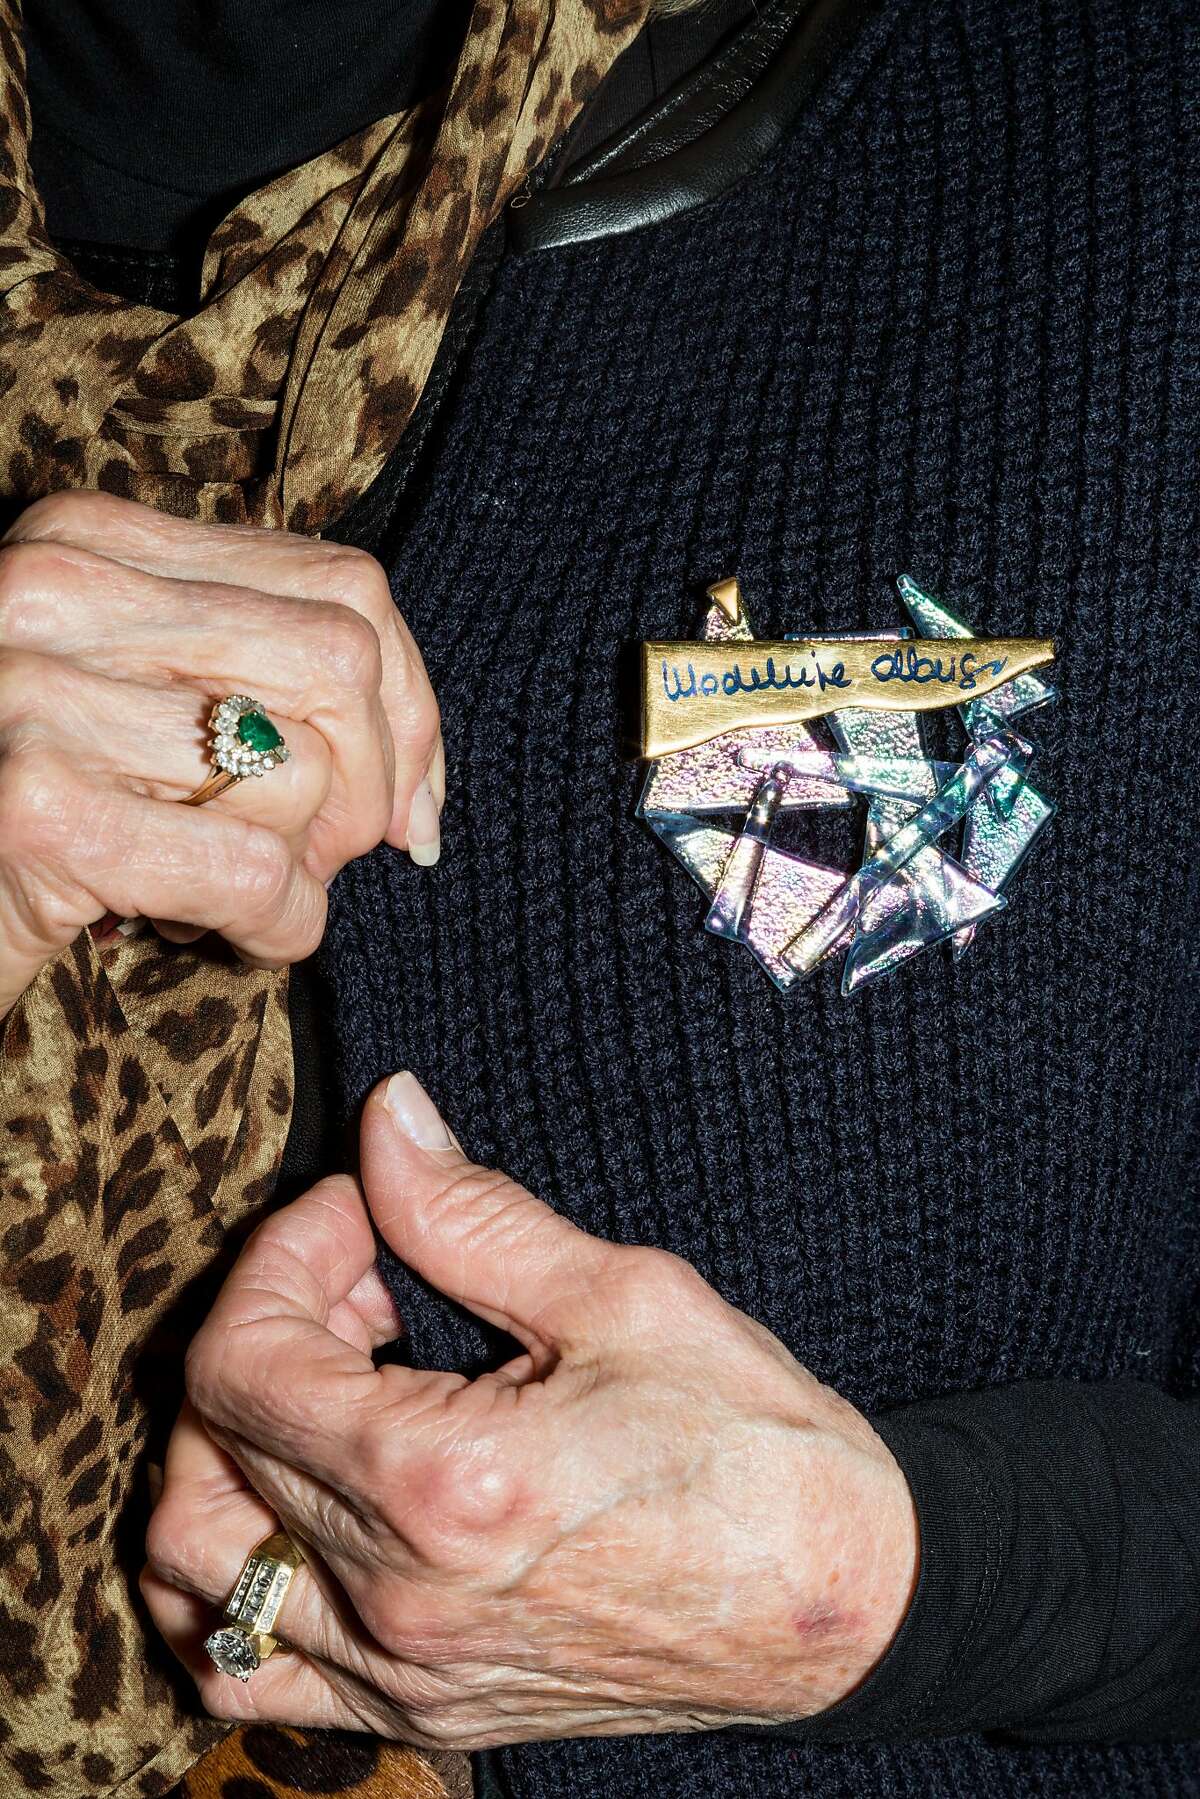 Madeleine Albright S Pins Tell The Story Of Her Career In World Politics